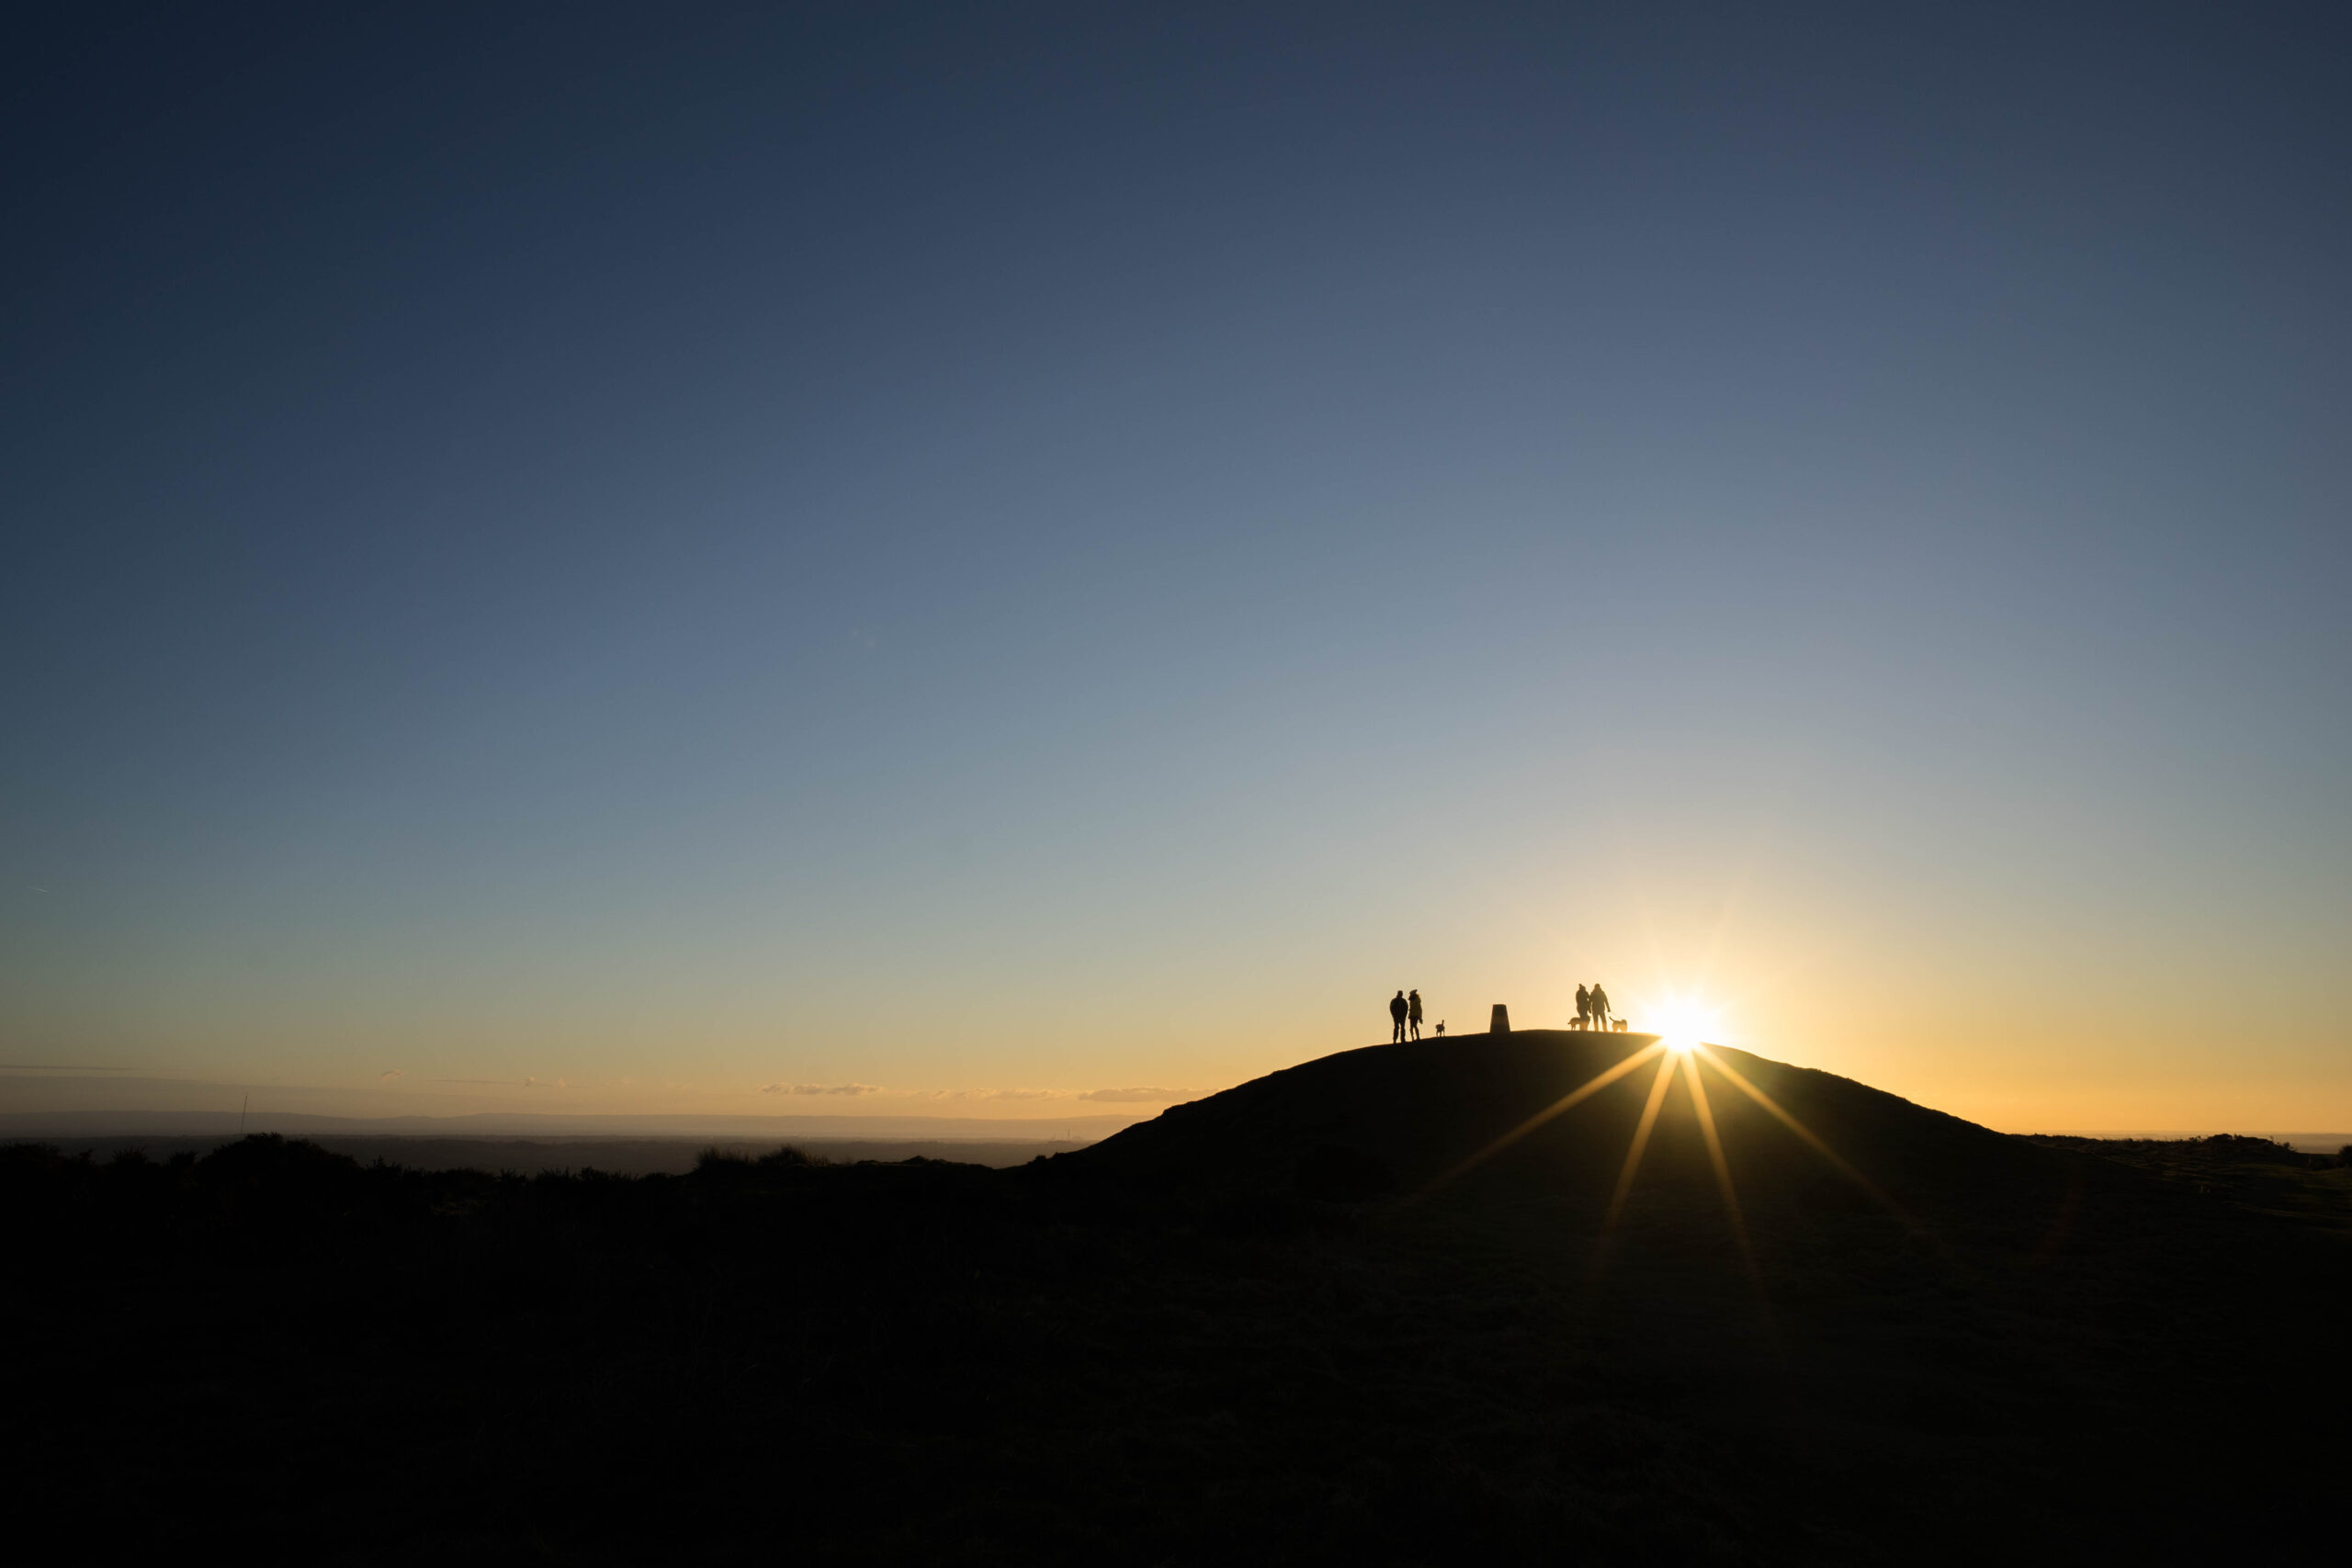 Silhouettes of people standing on top of a hill at sunset.